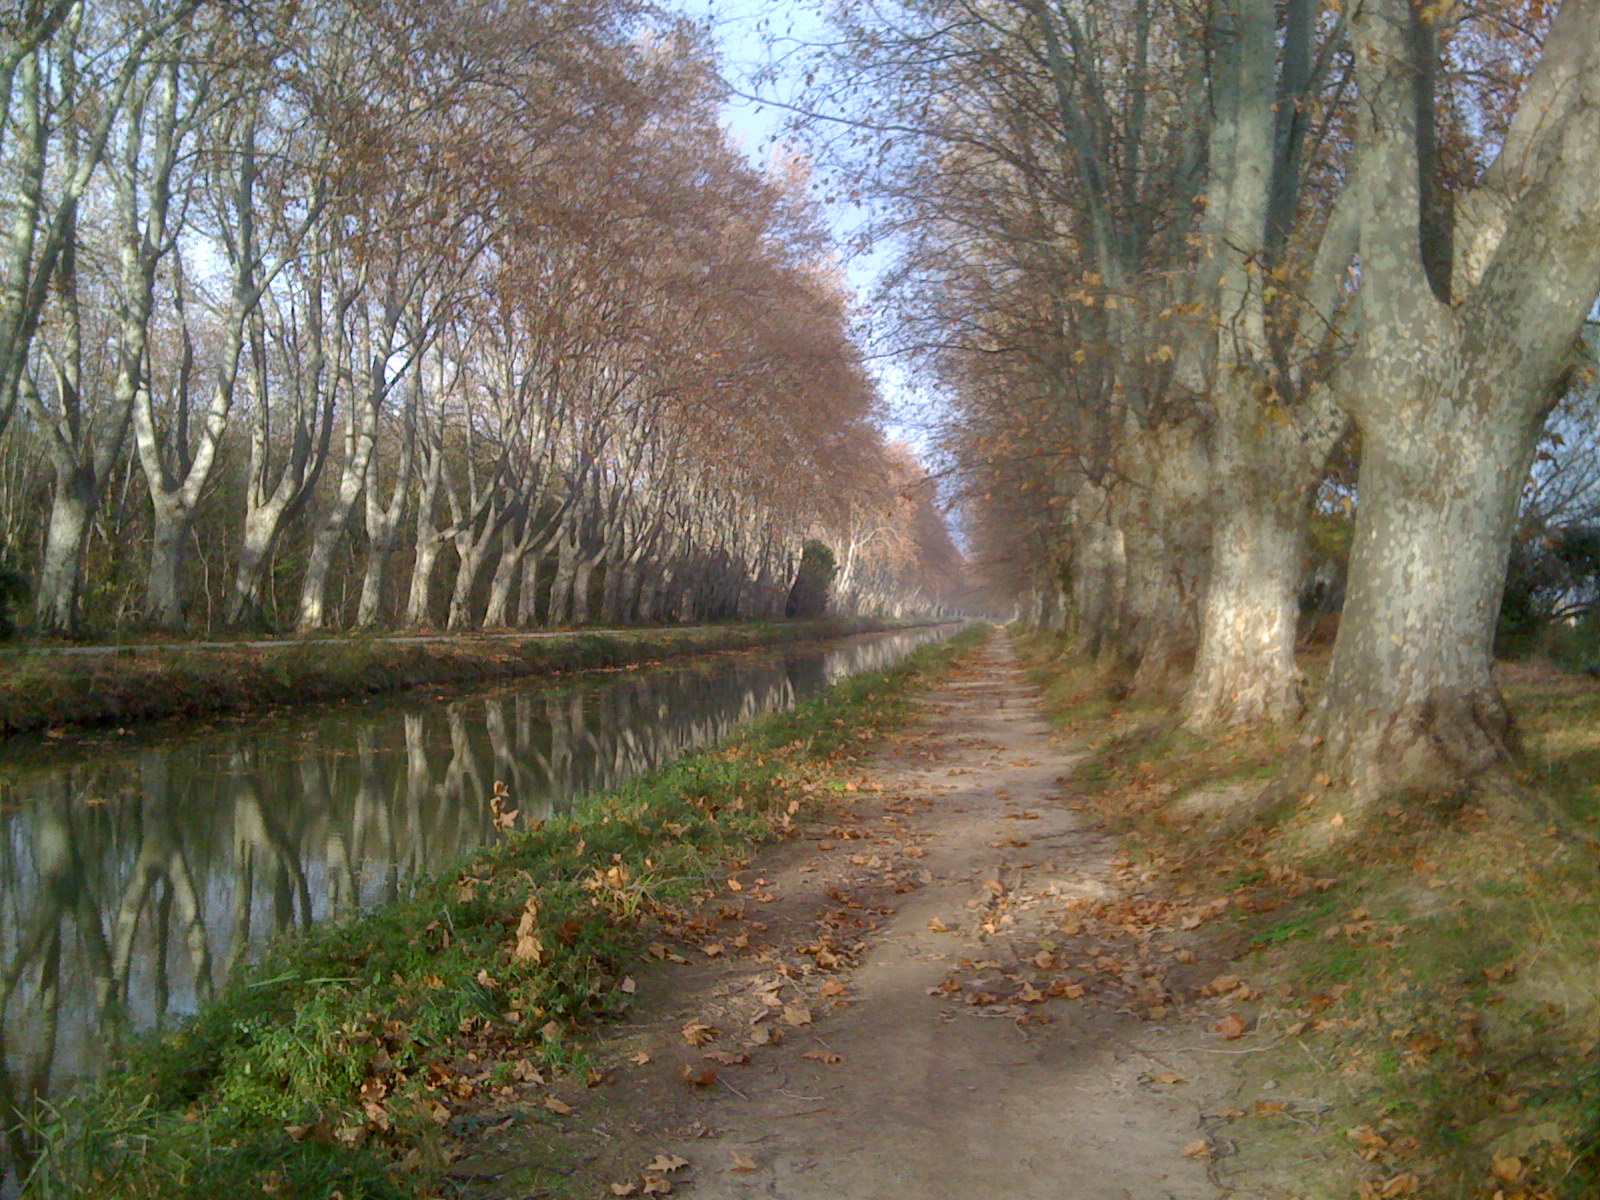 the road that runs through the leaf covered trees is next to the river